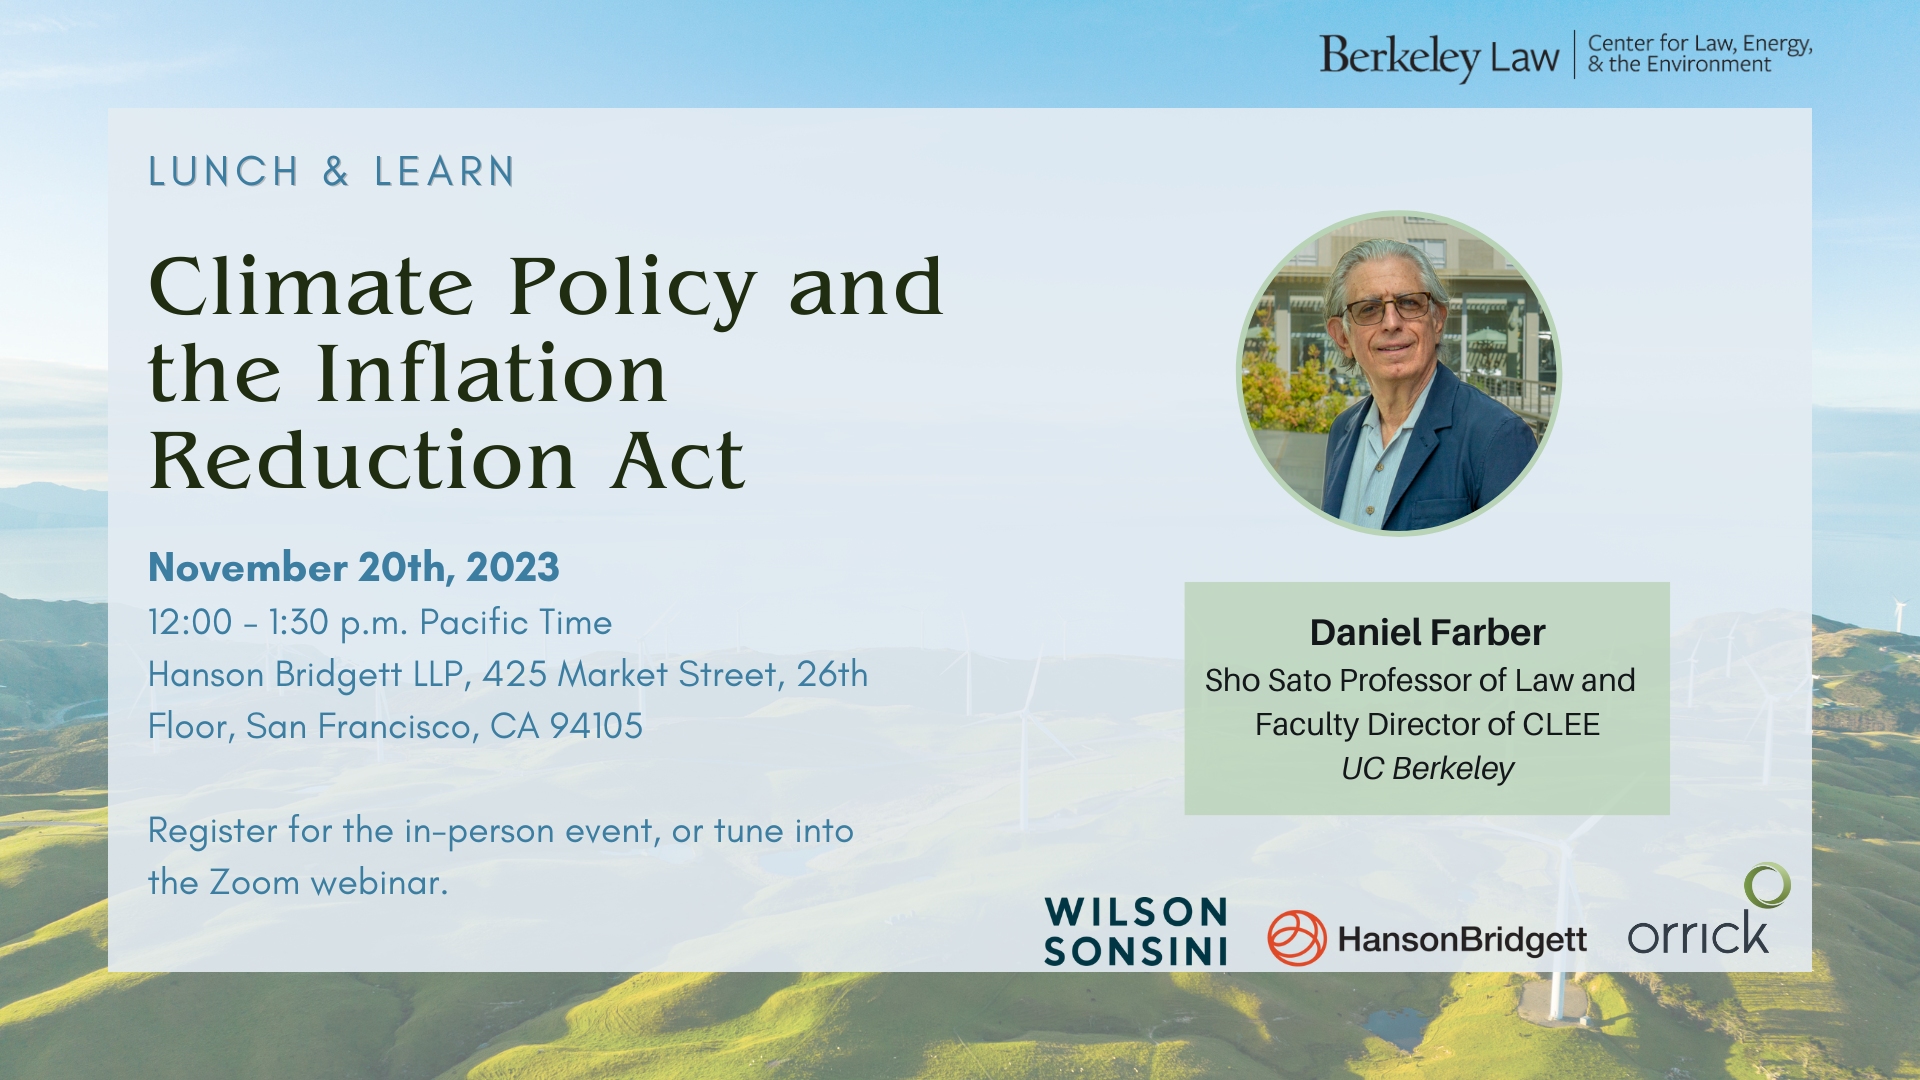 Flyer that says "Lunch and Learn: Climate Policy and the Inflation Reduction Act"